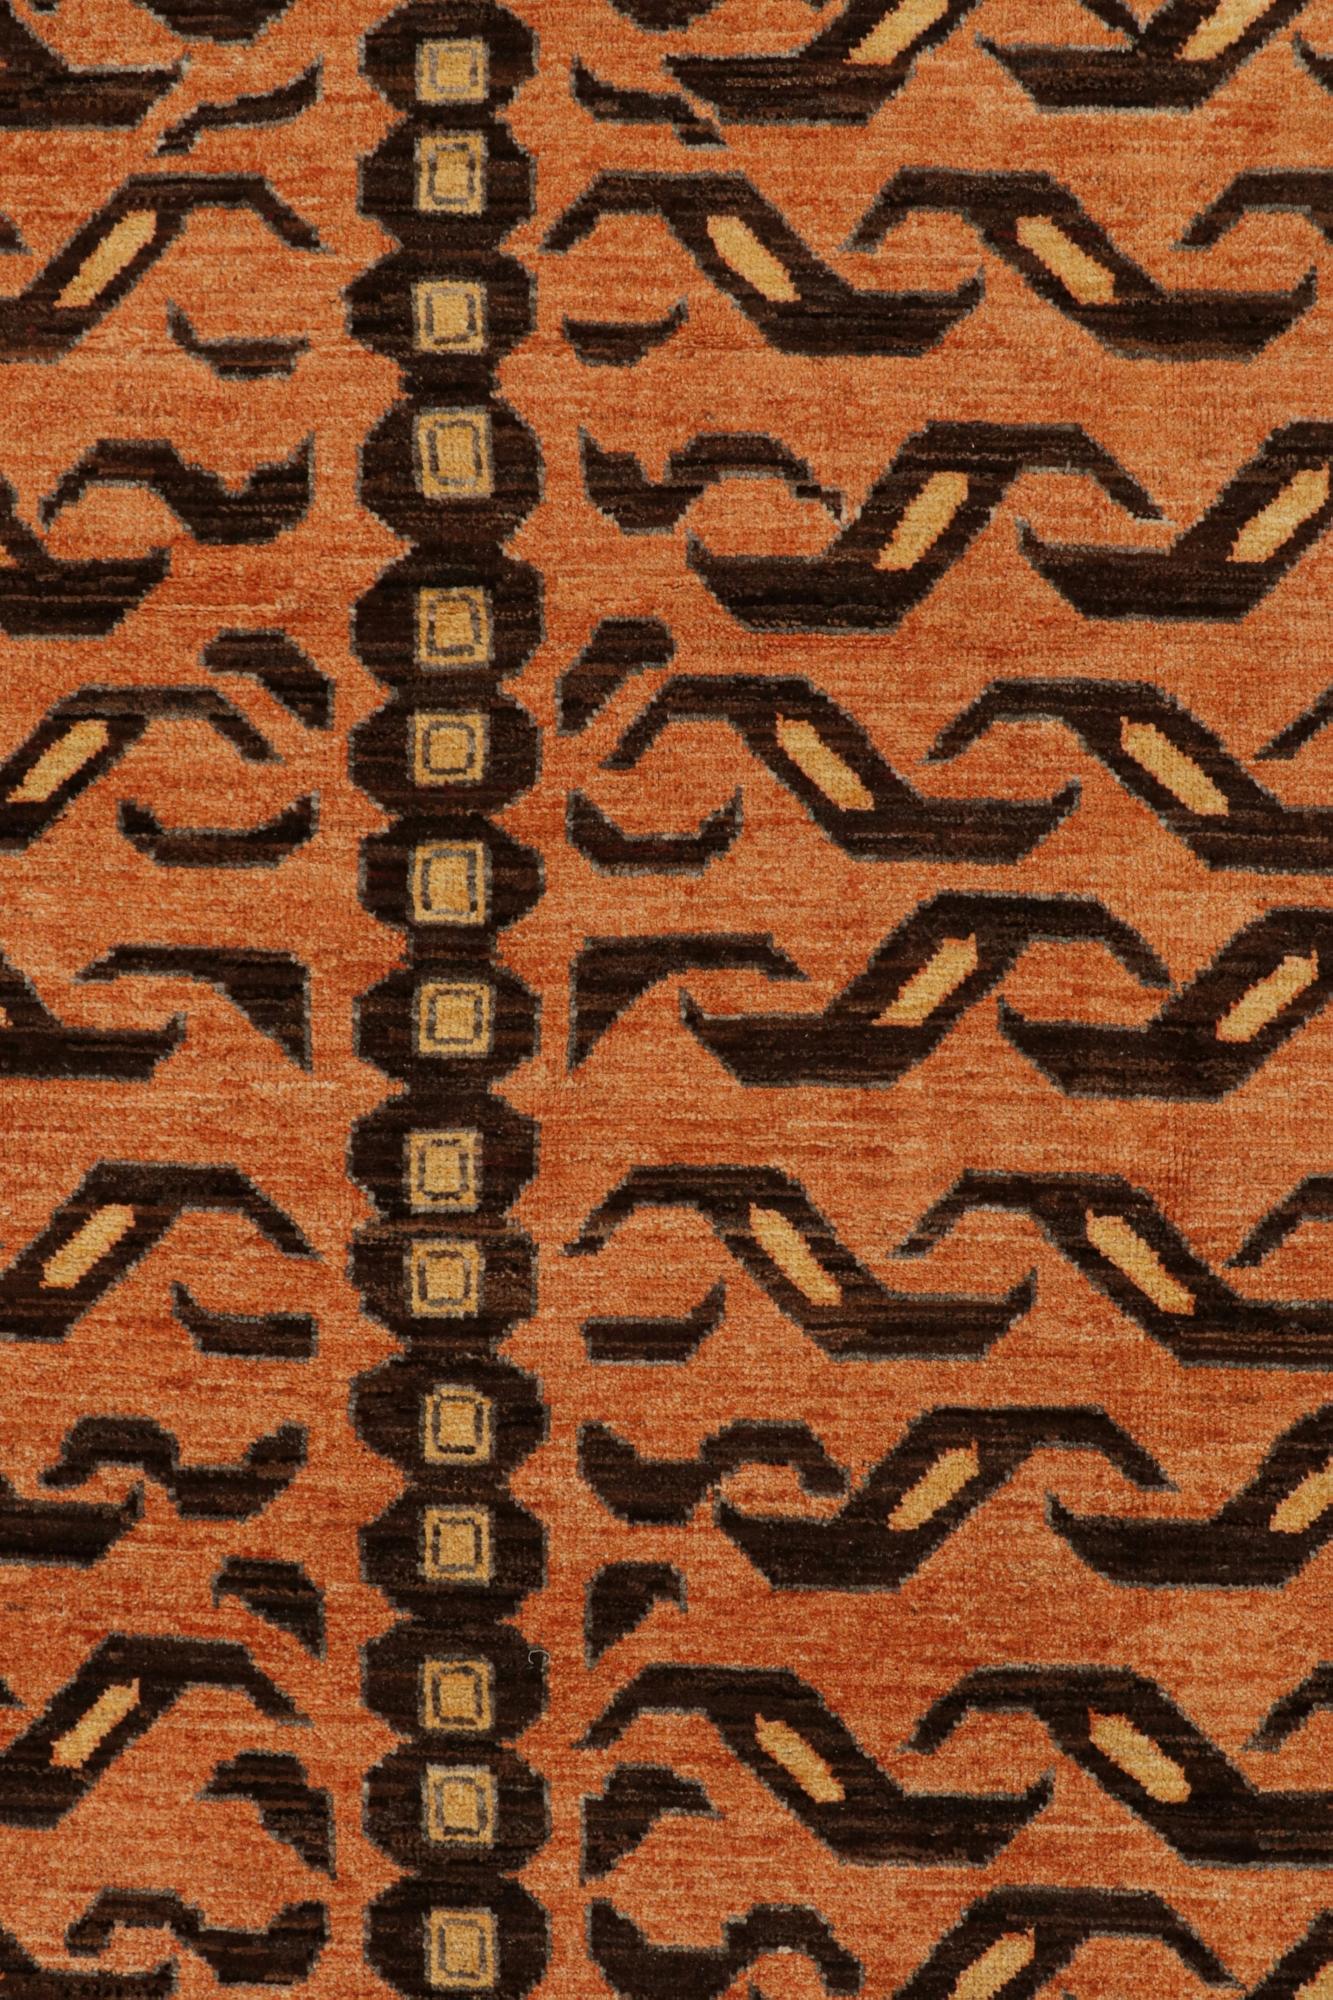 Afghan Rug & Kilim’s Classic-Style Tiger-Skin Rug Design with Orange & Brown Pictorial For Sale